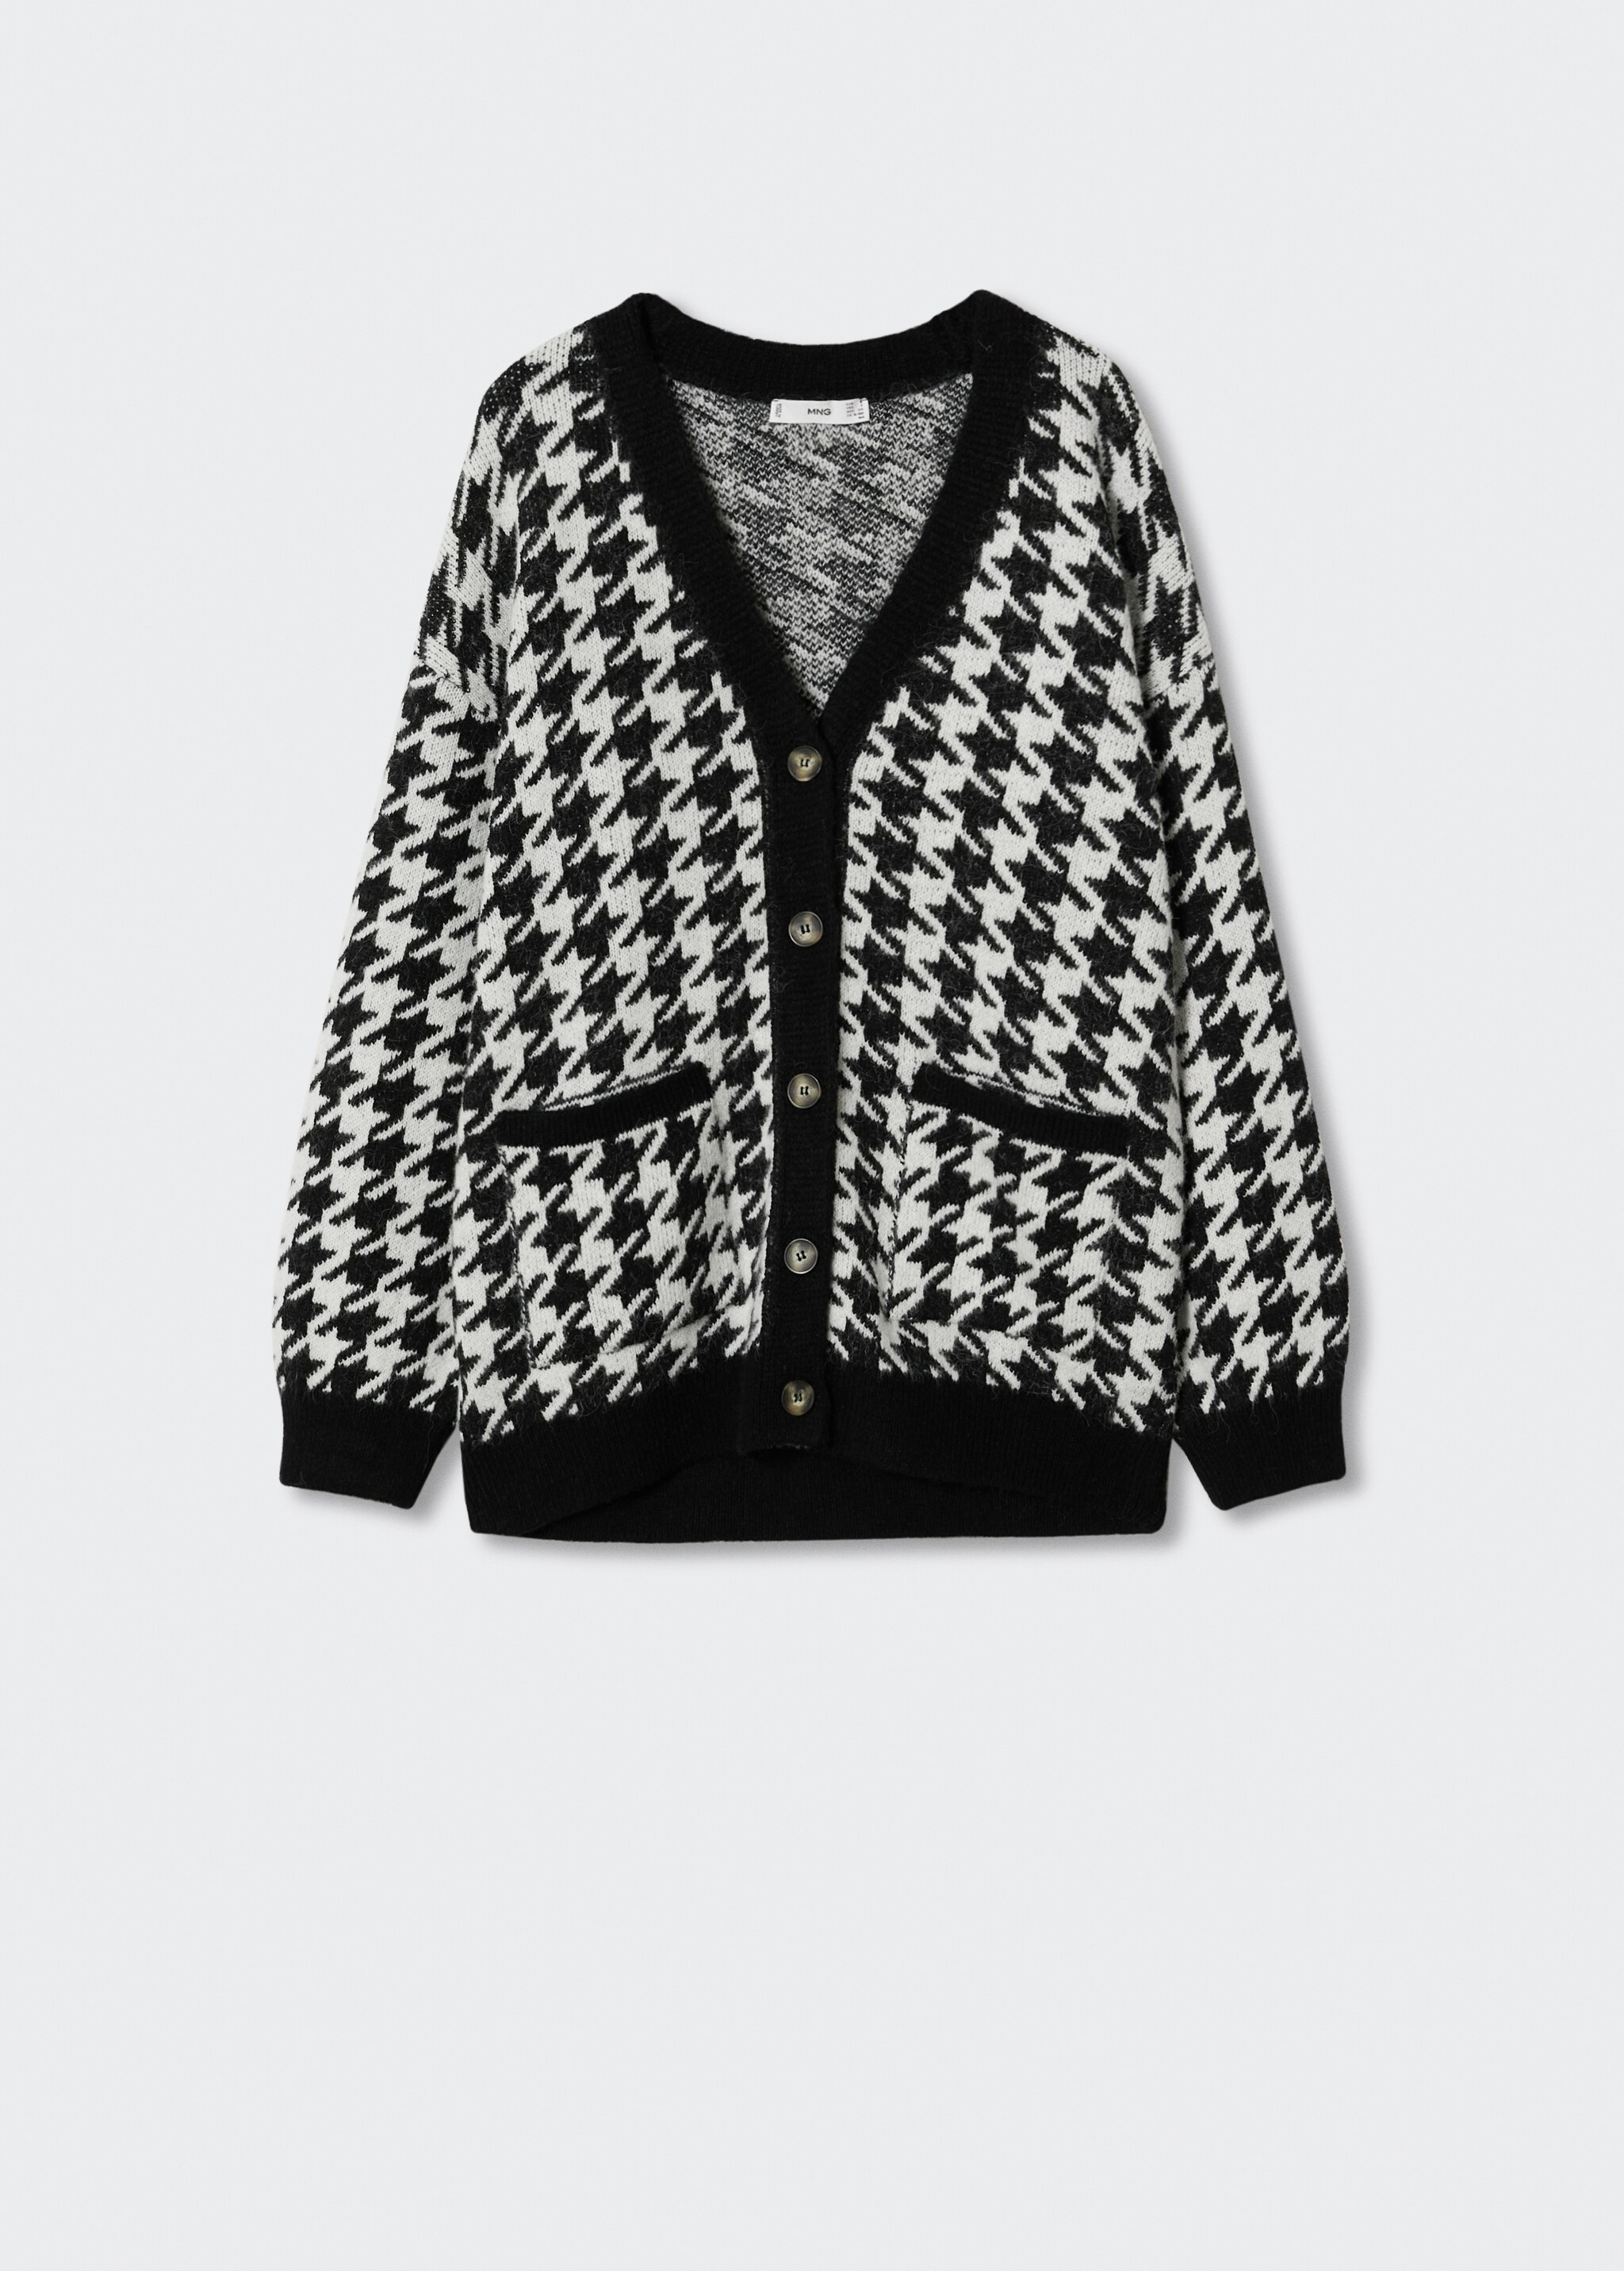 Houndstooth cardigan - Article without model